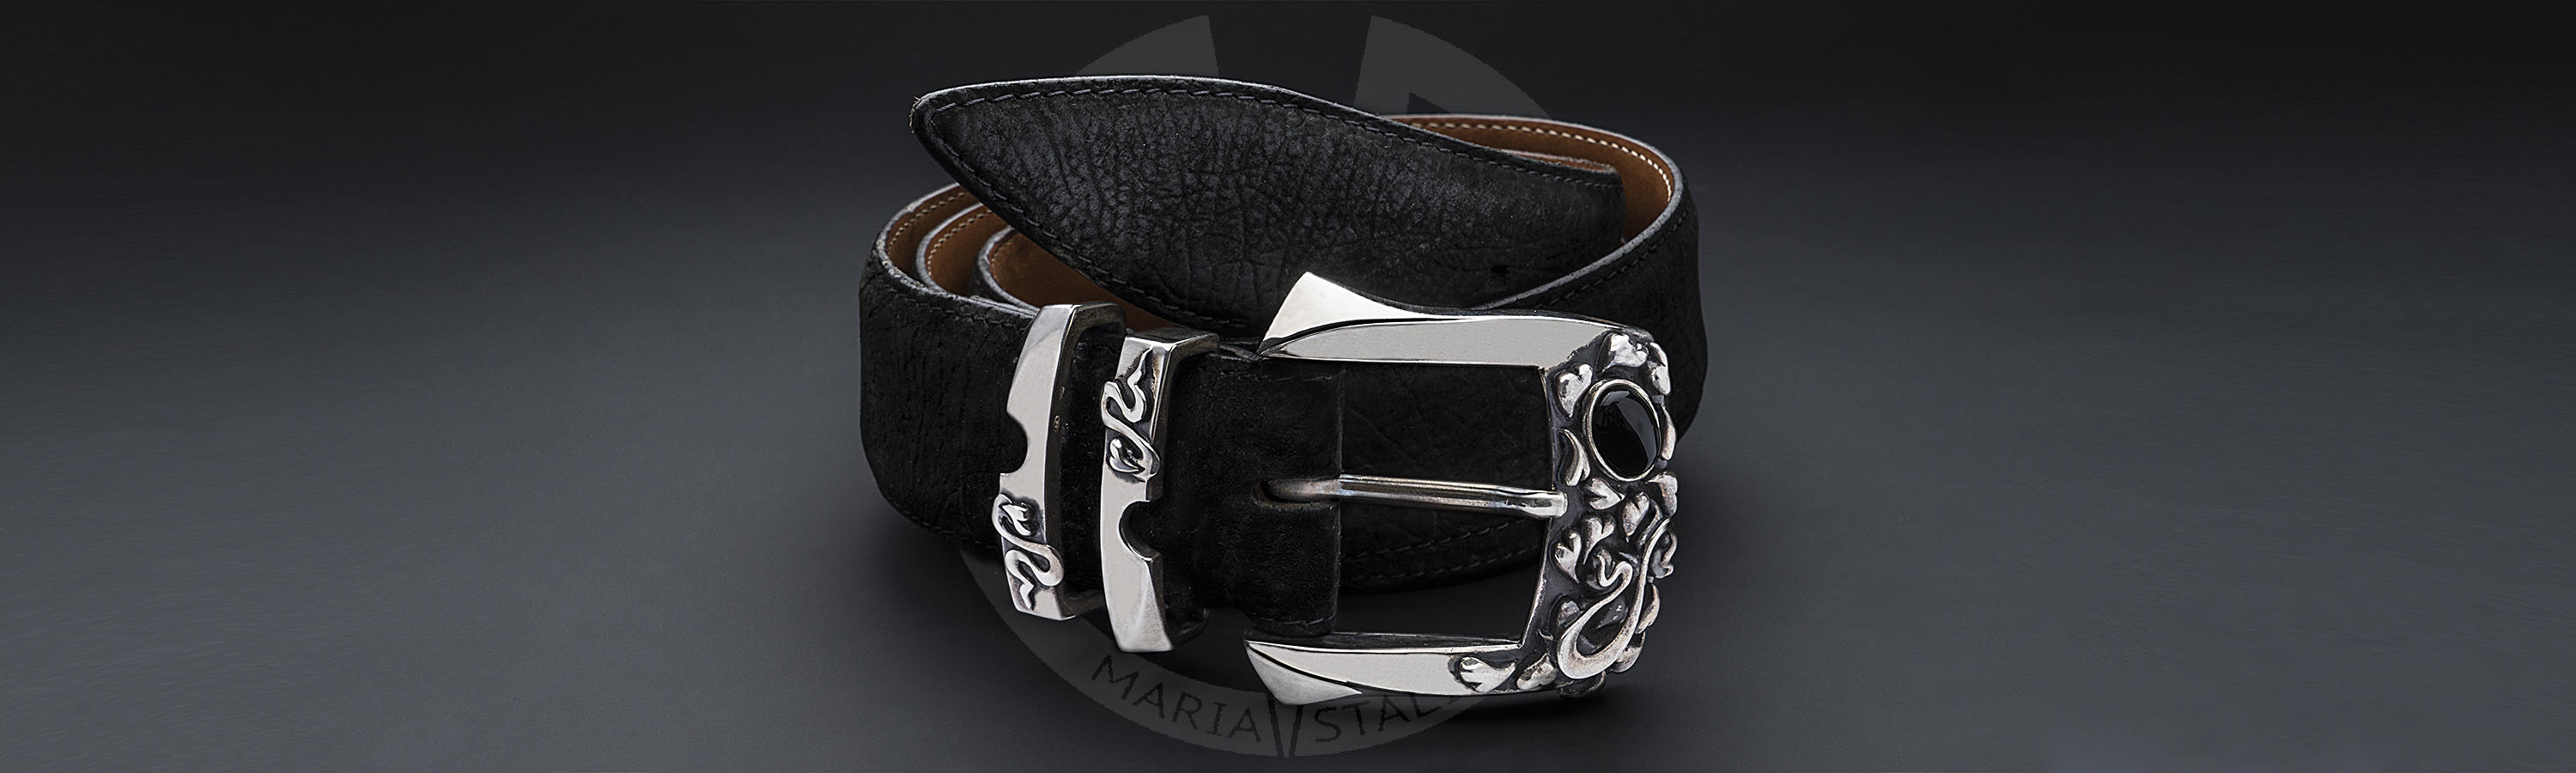 Leather Belt by Claudio Calestani